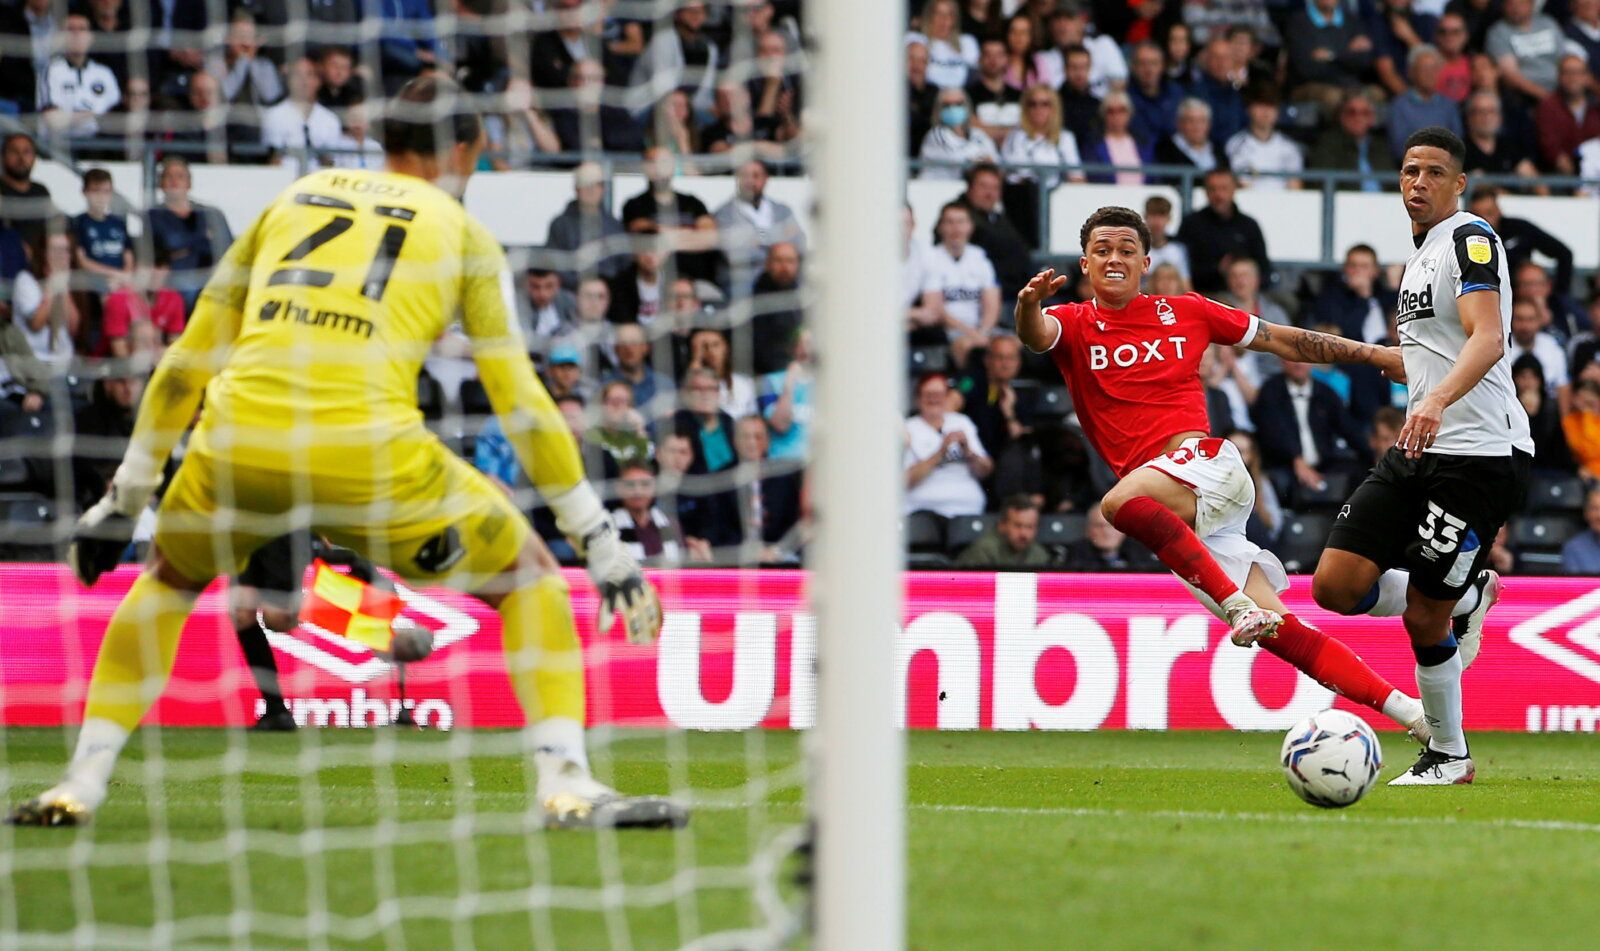 Soccer Football - Championship - Derby County v Nottingham Forest - Pride Park, Derby, Britain - August 28, 2021  Nottingham Forest's Brennan Johnson has an attempt on goal   Action Images/Craig Brough  EDITORIAL USE ONLY. No use with unauthorized audio, video, data, fixture lists, club/league logos or 